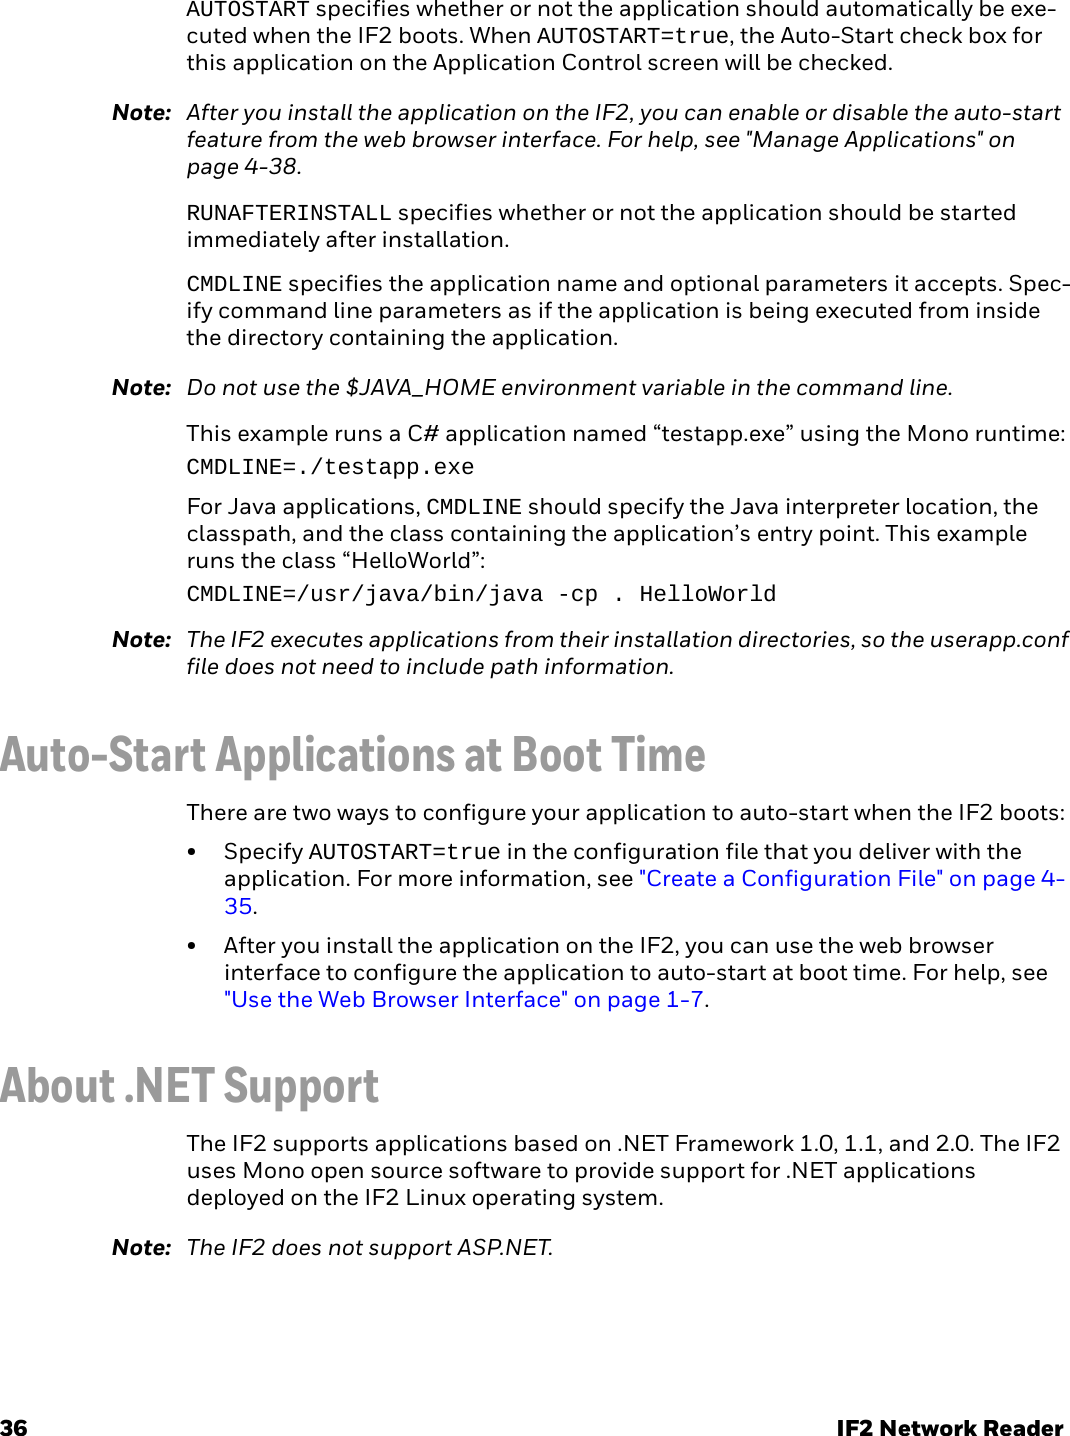 36 IF2 Network ReaderAUTOSTART specifies whether or not the application should automatically be exe-cuted when the IF2 boots. When AUTOSTART=true, the Auto-Start check box for this application on the Application Control screen will be checked.Note: After you install the application on the IF2, you can enable or disable the auto-start feature from the web browser interface. For help, see &quot;Manage Applications&quot; on page 4-38.RUNAFTERINSTALL specifies whether or not the application should be started immediately after installation.CMDLINE specifies the application name and optional parameters it accepts. Spec-ify command line parameters as if the application is being executed from inside the directory containing the application.Note: Do not use the $JAVA_HOME environment variable in the command line.This example runs a C# application named “testapp.exe” using the Mono runtime:CMDLINE=./testapp.exeFor Java applications, CMDLINE should specify the Java interpreter location, the classpath, and the class containing the application’s entry point. This example runs the class “HelloWorld”:CMDLINE=/usr/java/bin/java -cp . HelloWorldNote: The IF2 executes applications from their installation directories, so the userapp.conf file does not need to include path information.Auto-Start Applications at Boot TimeThere are two ways to configure your application to auto-start when the IF2 boots:•Specify AUTOSTART=true in the configuration file that you deliver with the application. For more information, see &quot;Create a Configuration File&quot; on page 4-35.• After you install the application on the IF2, you can use the web browser interface to configure the application to auto-start at boot time. For help, see &quot;Use the Web Browser Interface&quot; on page 1-7.About .NET SupportThe IF2 supports applications based on .NET Framework 1.0, 1.1, and 2.0. The IF2 uses Mono open source software to provide support for .NET applications deployed on the IF2 Linux operating system.Note: The IF2 does not support ASP.NET.